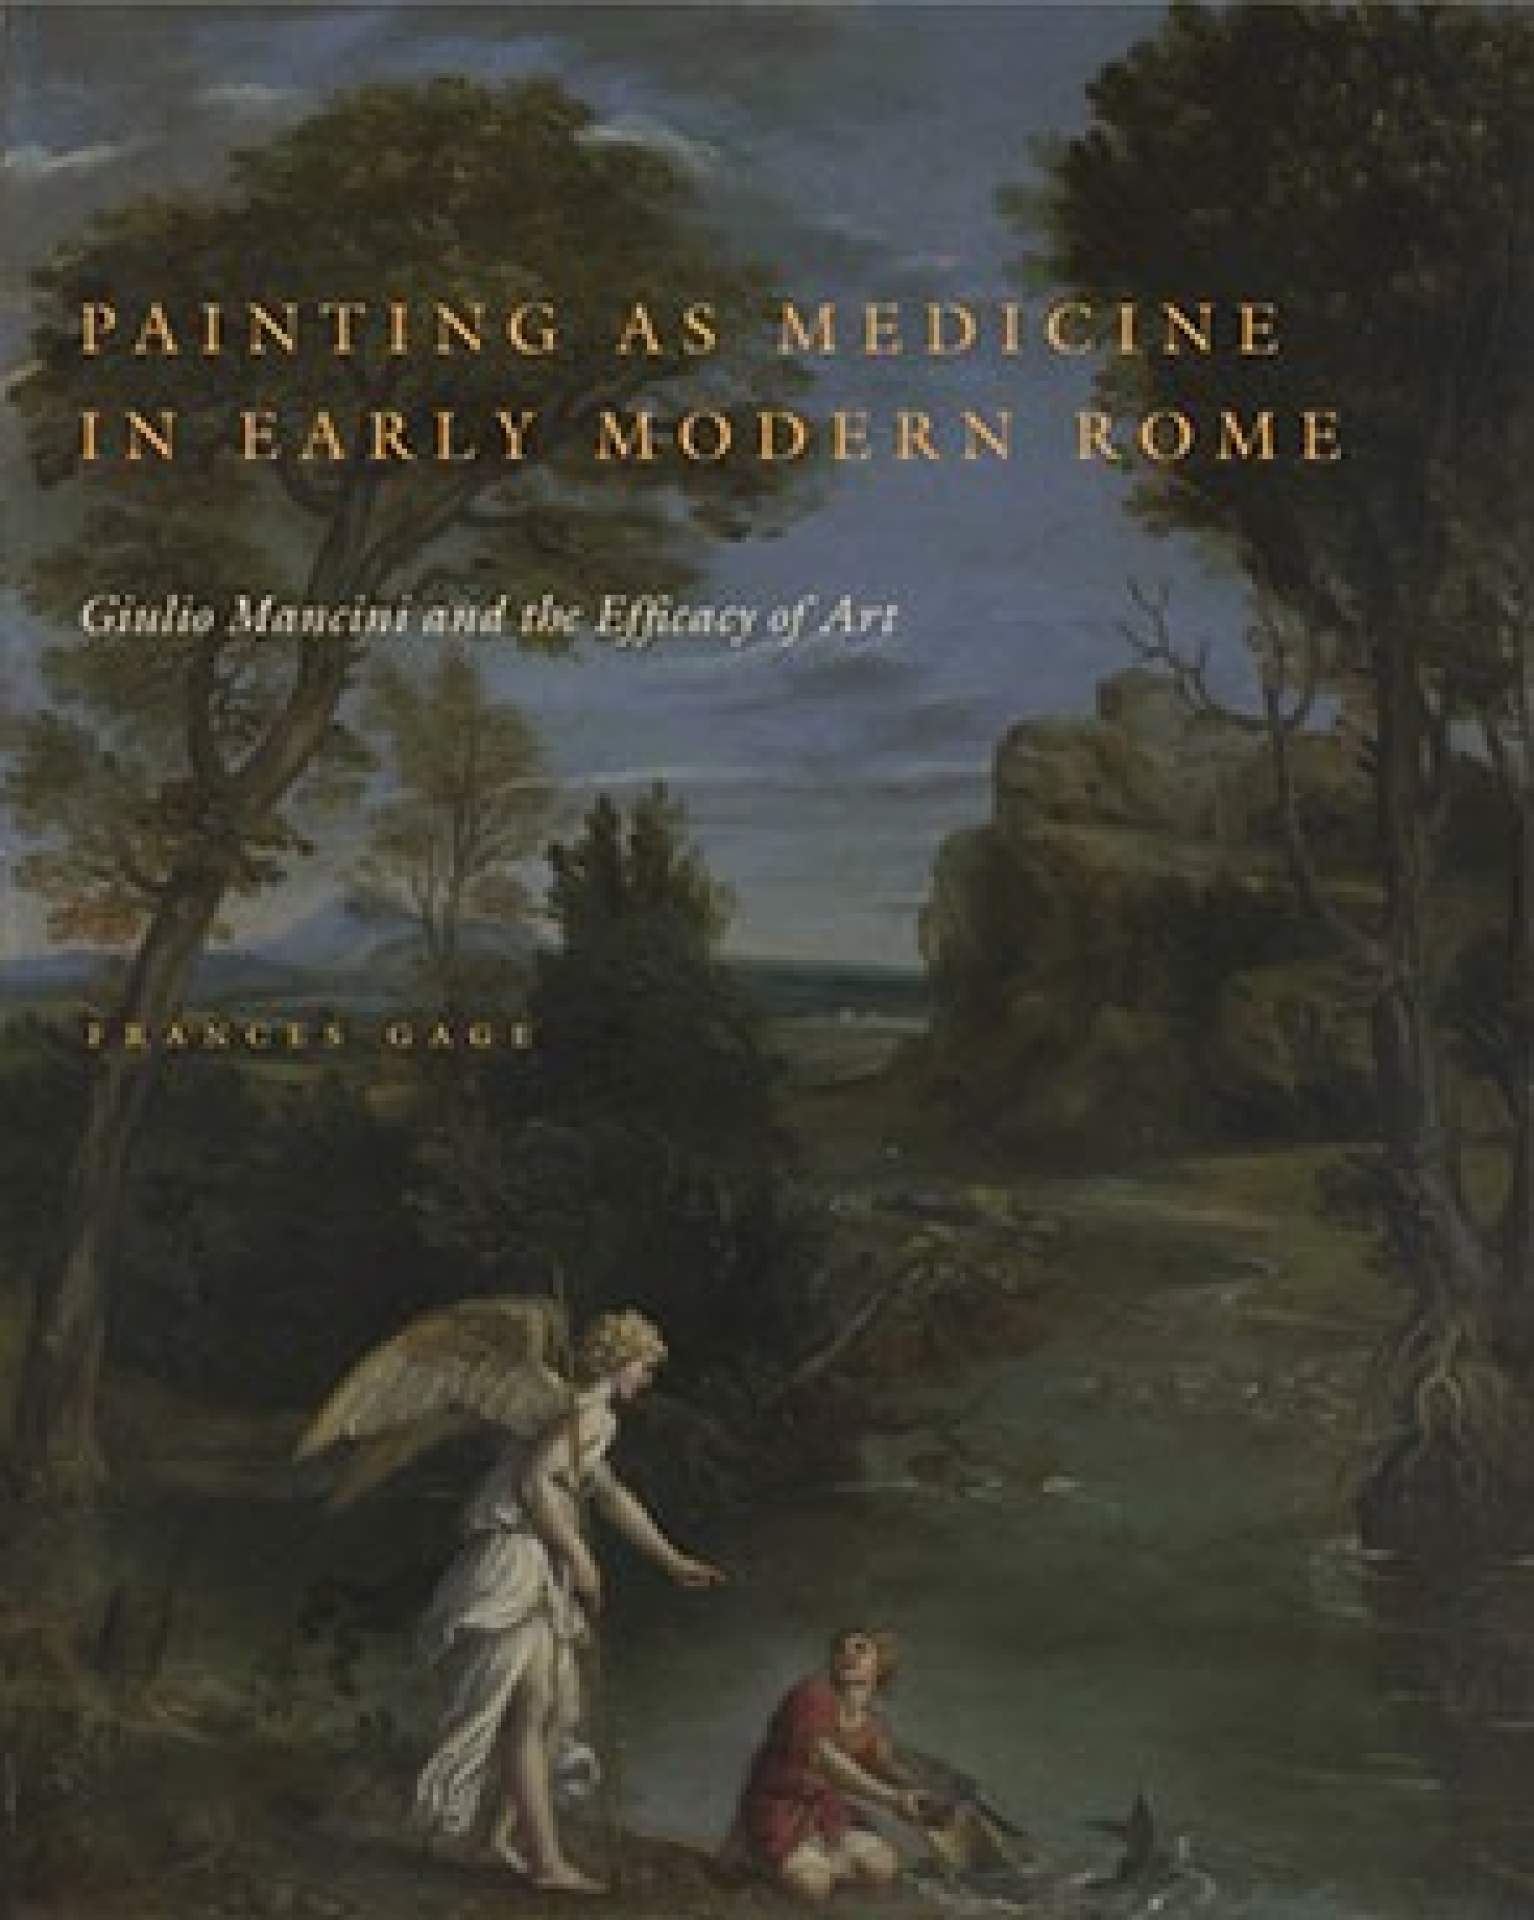 Painting as Medicine in Early Modern Rome: Giulio Mancini and the Efficacy of Art